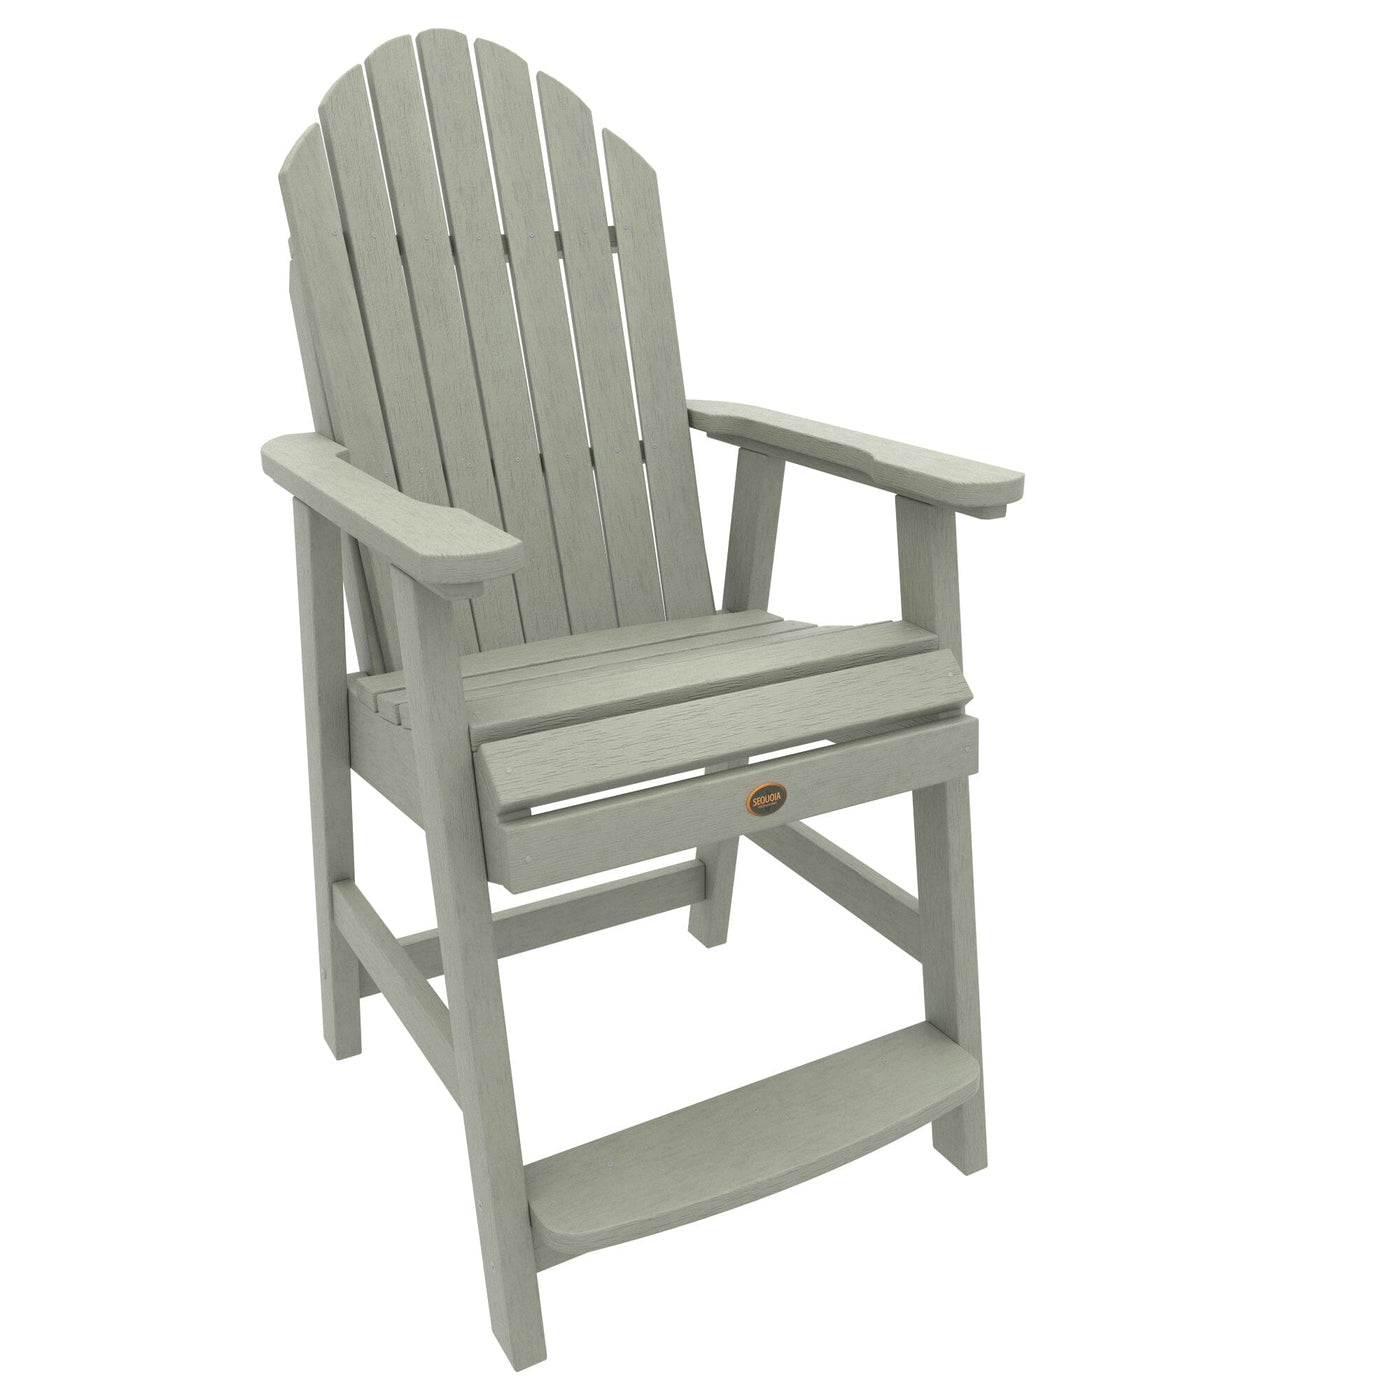 Commercial Grade Muskoka Adirondack Deck Dining Chair in Counter Height Adirondack Chairs Sequoia Professional Eucalyptus 